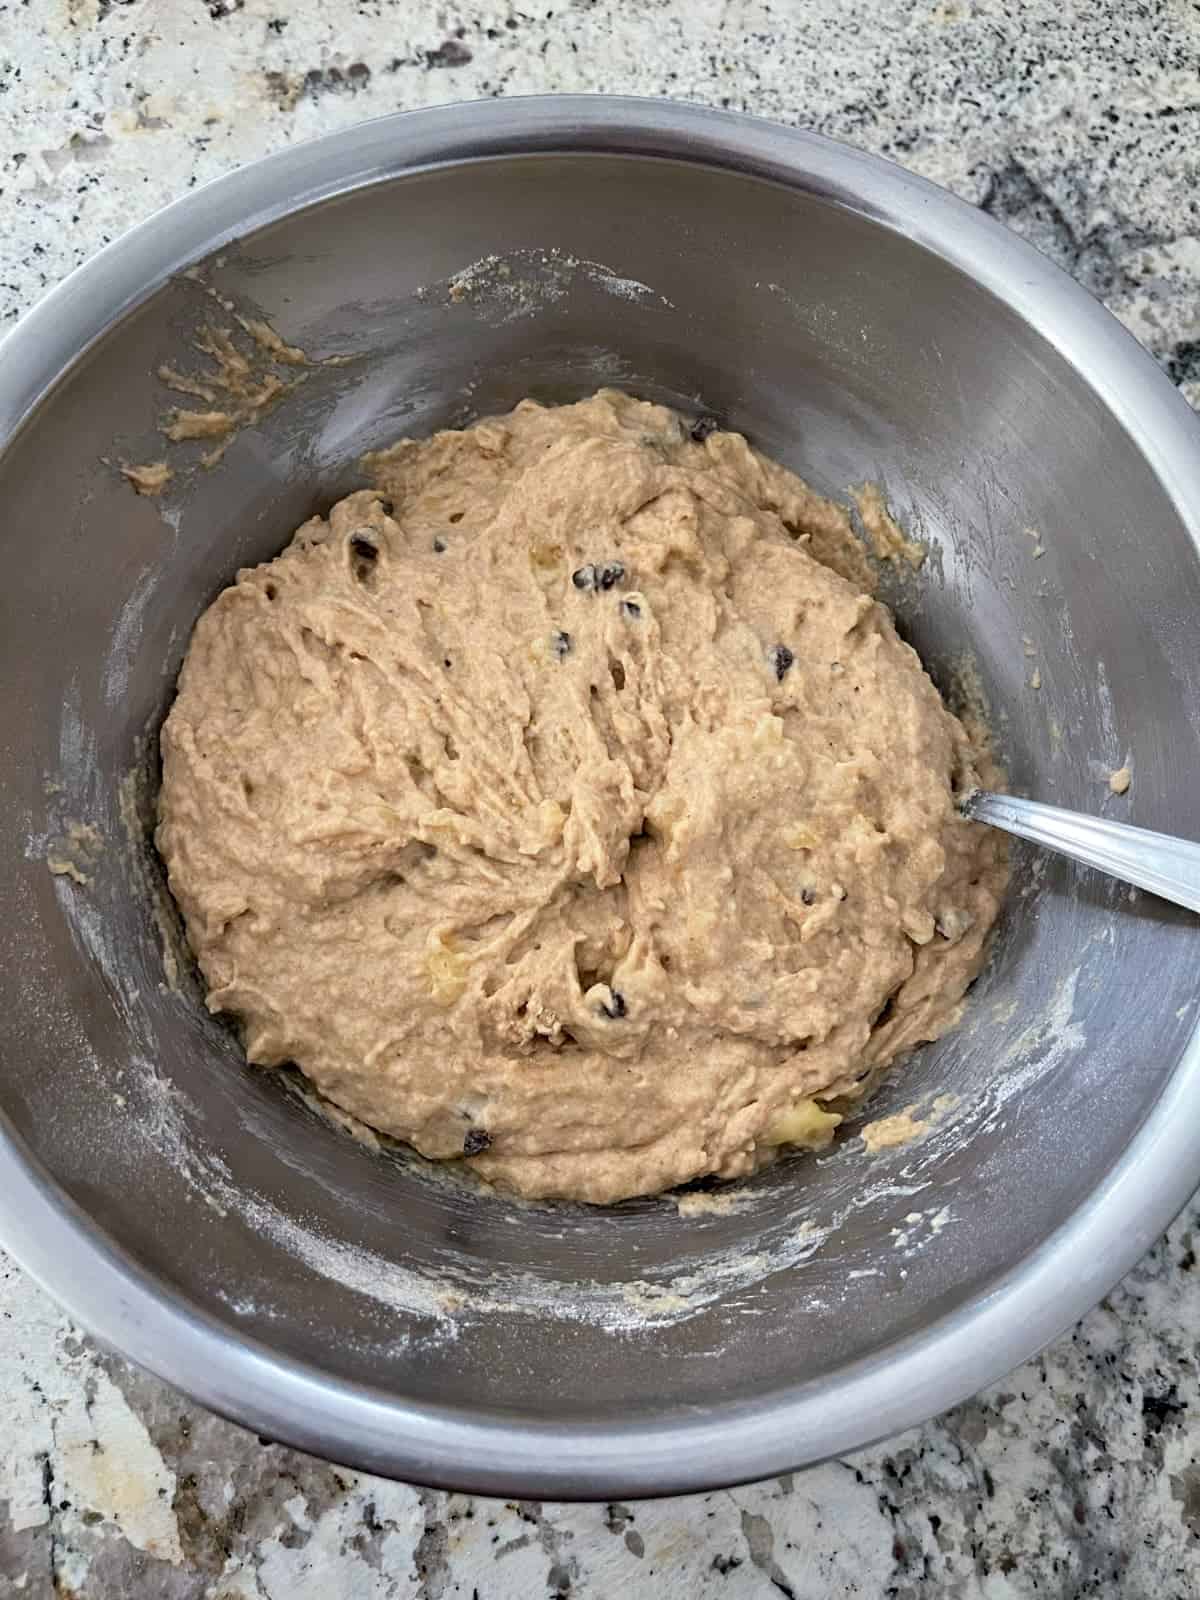 Mixing banana chocolate chip pancake batter in stainless mixing bowl with spoon.